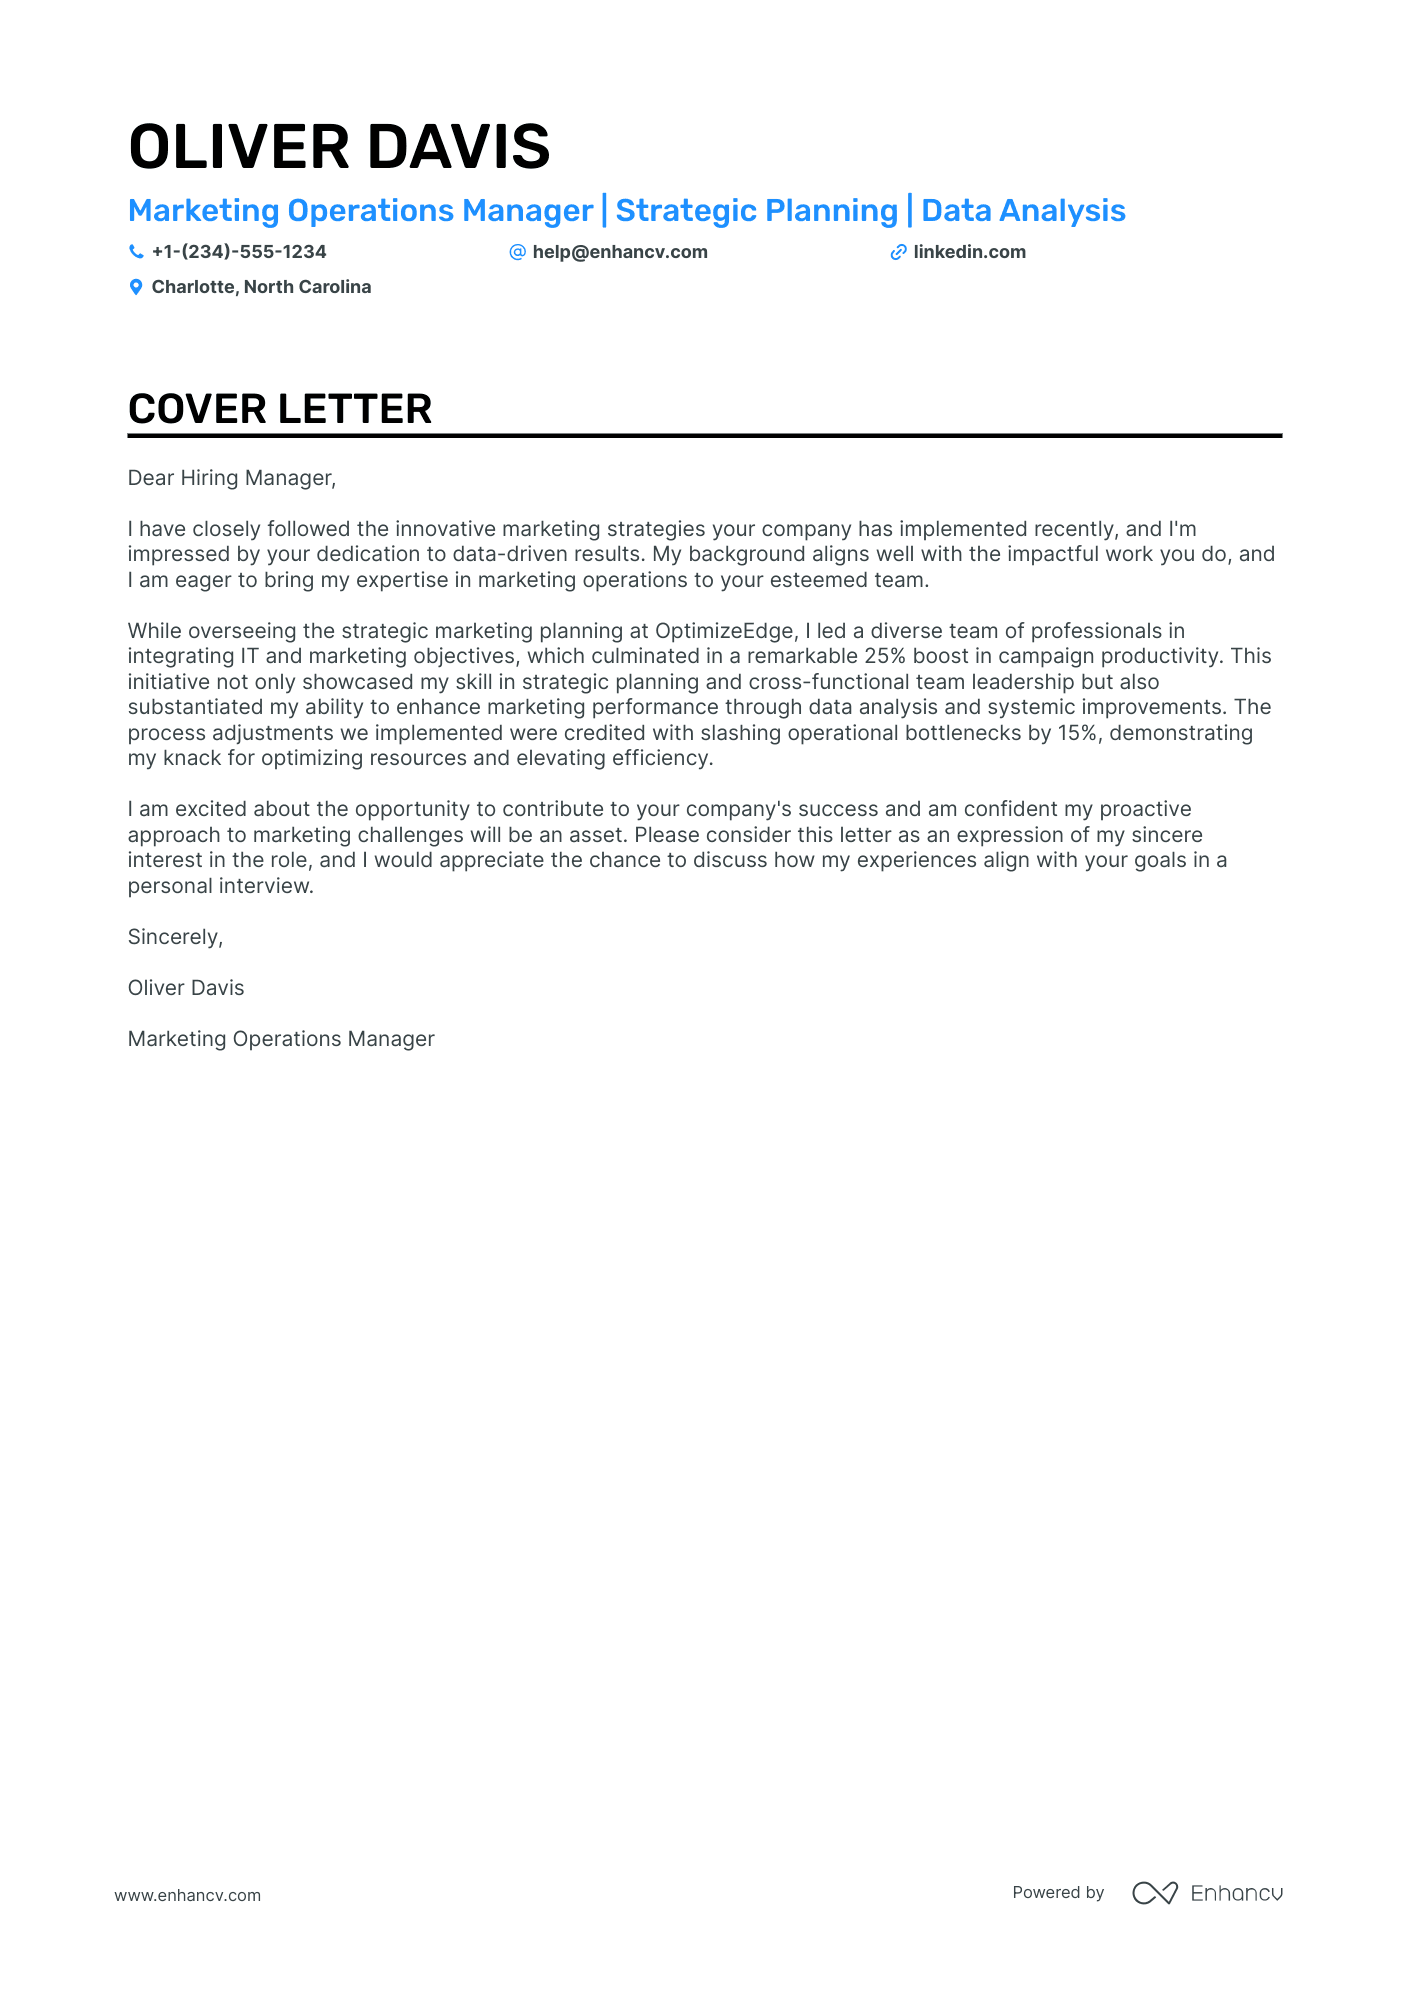 Marketing Operations Manager cover letter